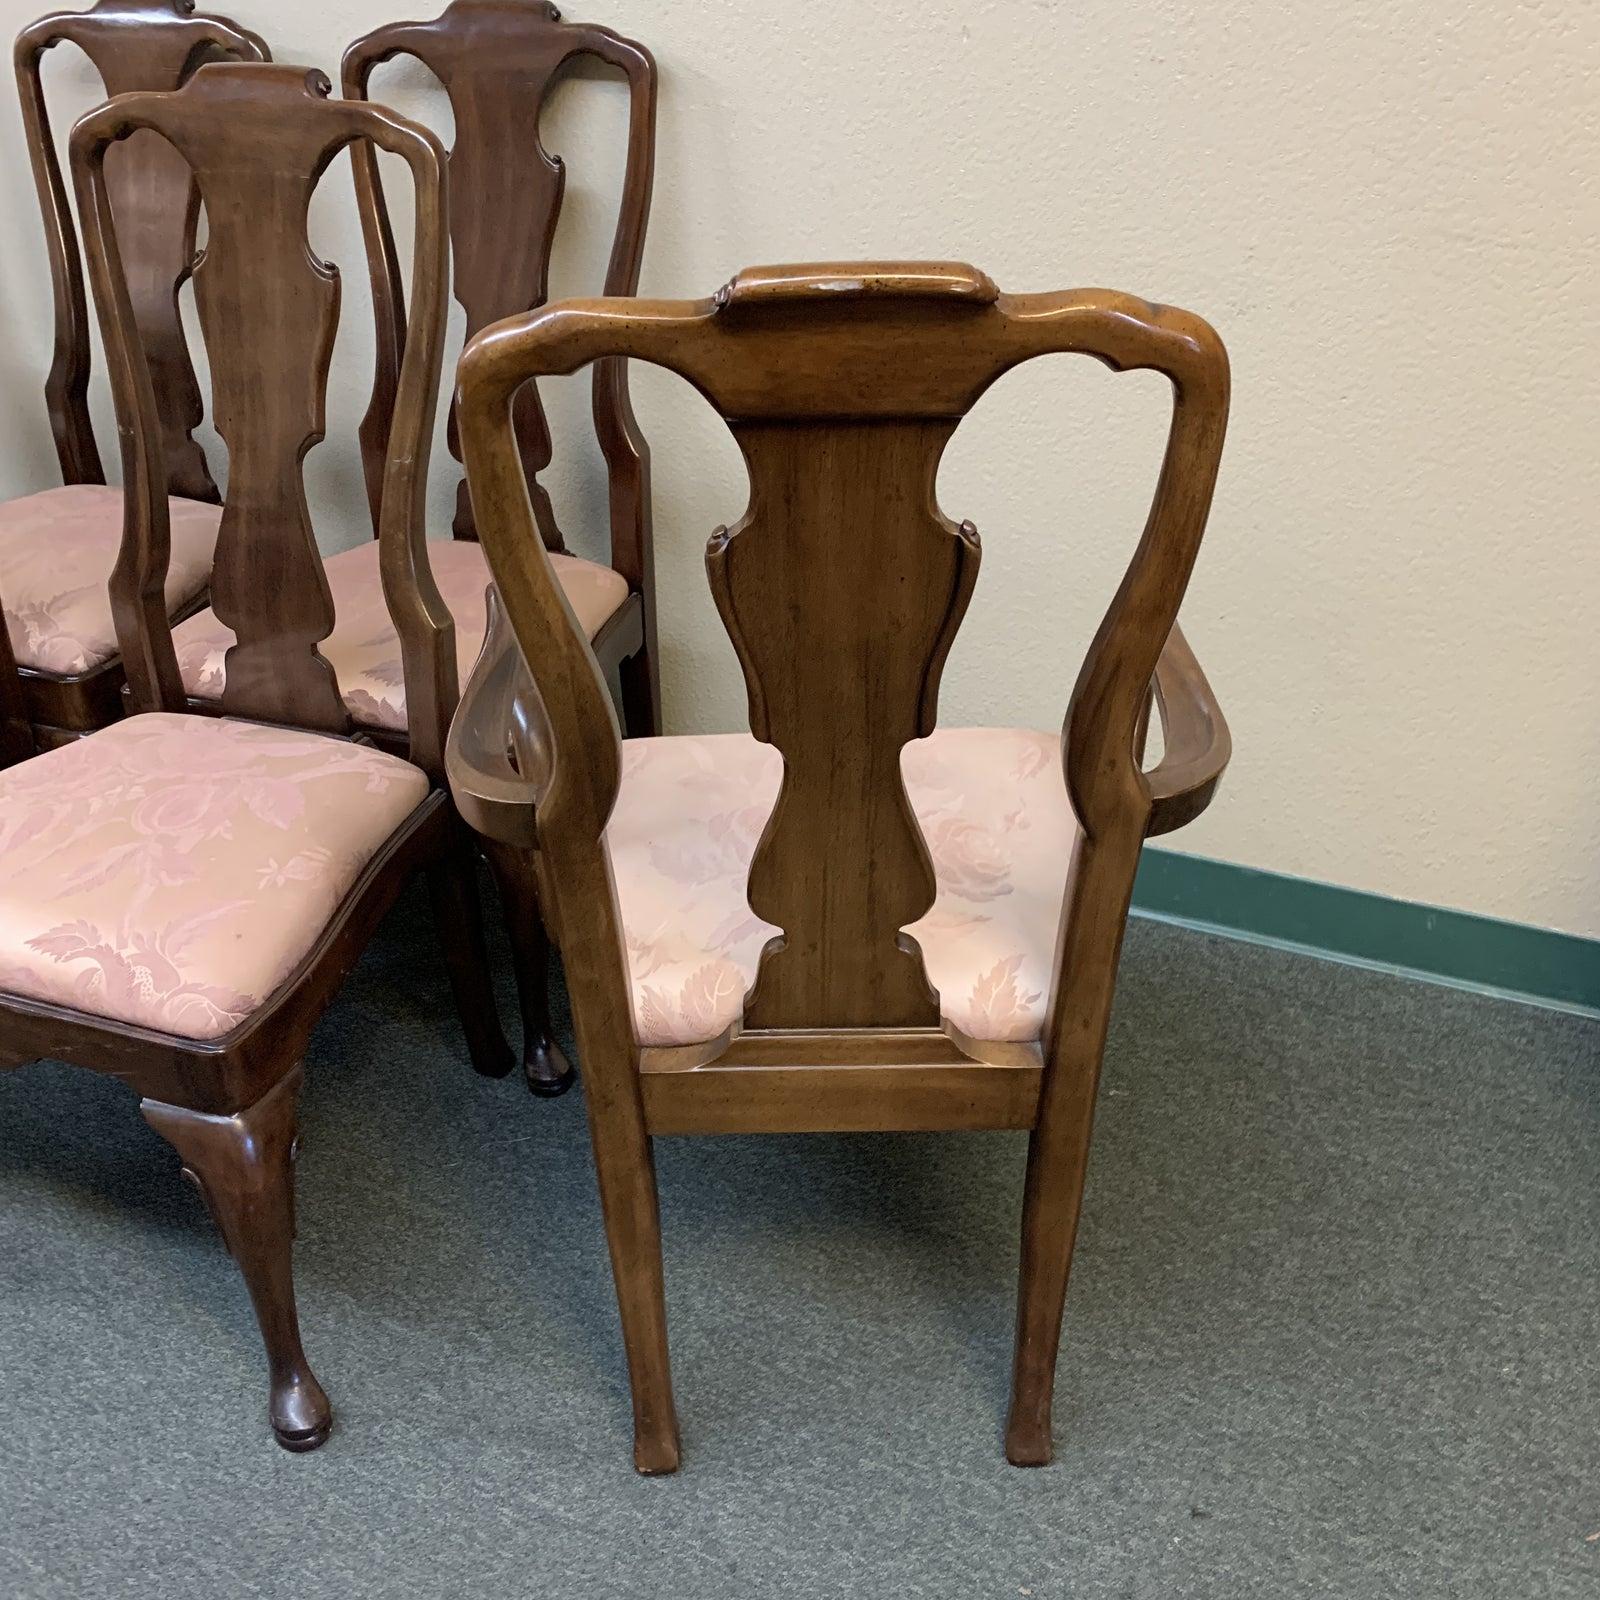 Presents a set of six Henredon Aston Court collection chairs. Ball and claw frame is slenderly finished in rich walnut tone. Seat upholstered with dusty rose damask patterning. Minor wear on frame and staining on seats. Makers mark on the bottom of